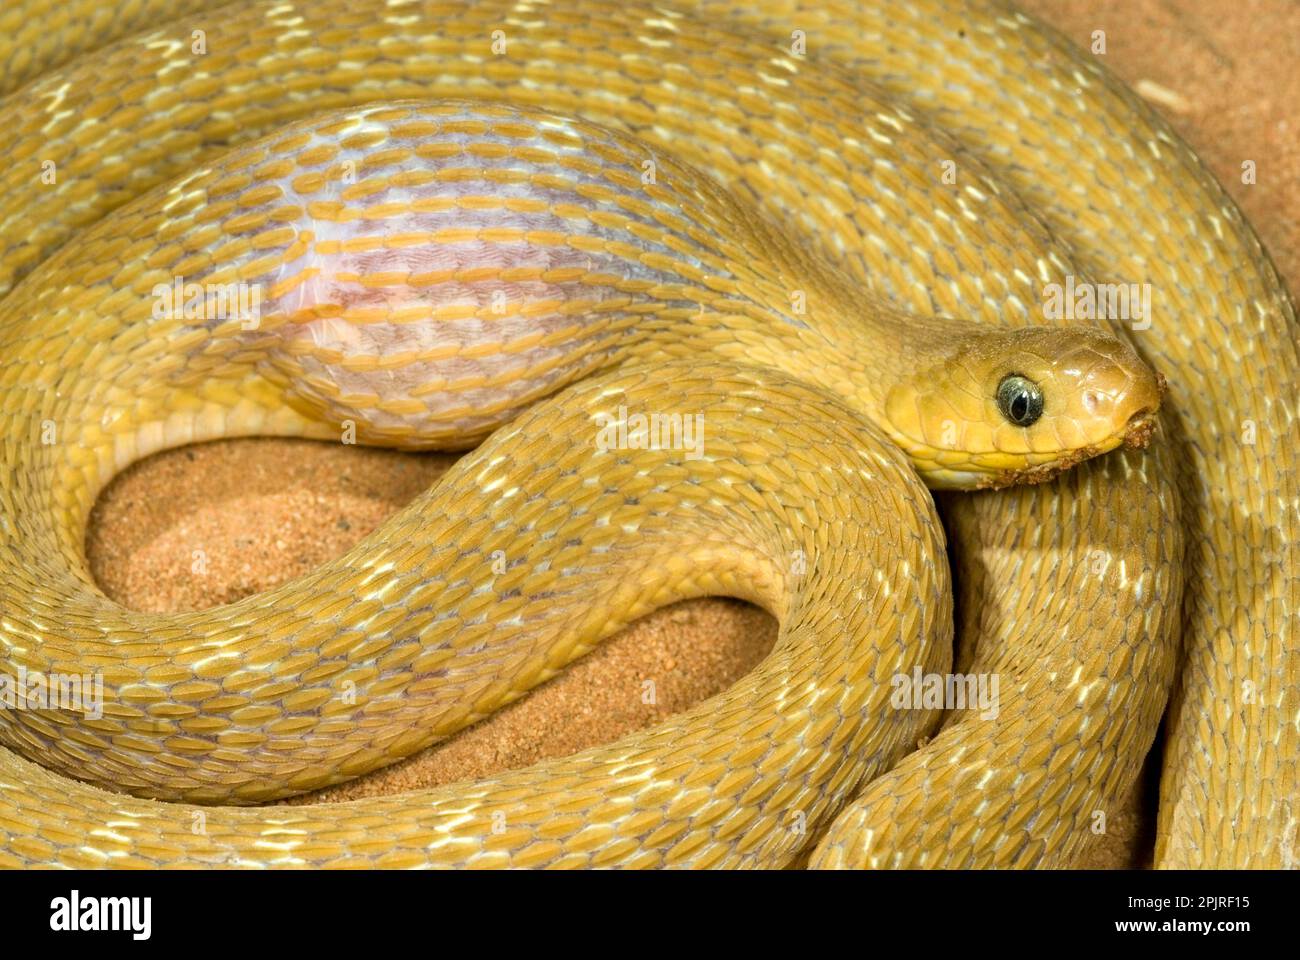 African Egg-eater Snake, Other animals, Reptiles, Snakes, Animals, Common Egg-eater Snake (Dasypeltis scabra) adult, feeding, after having swallowed Stock Photo